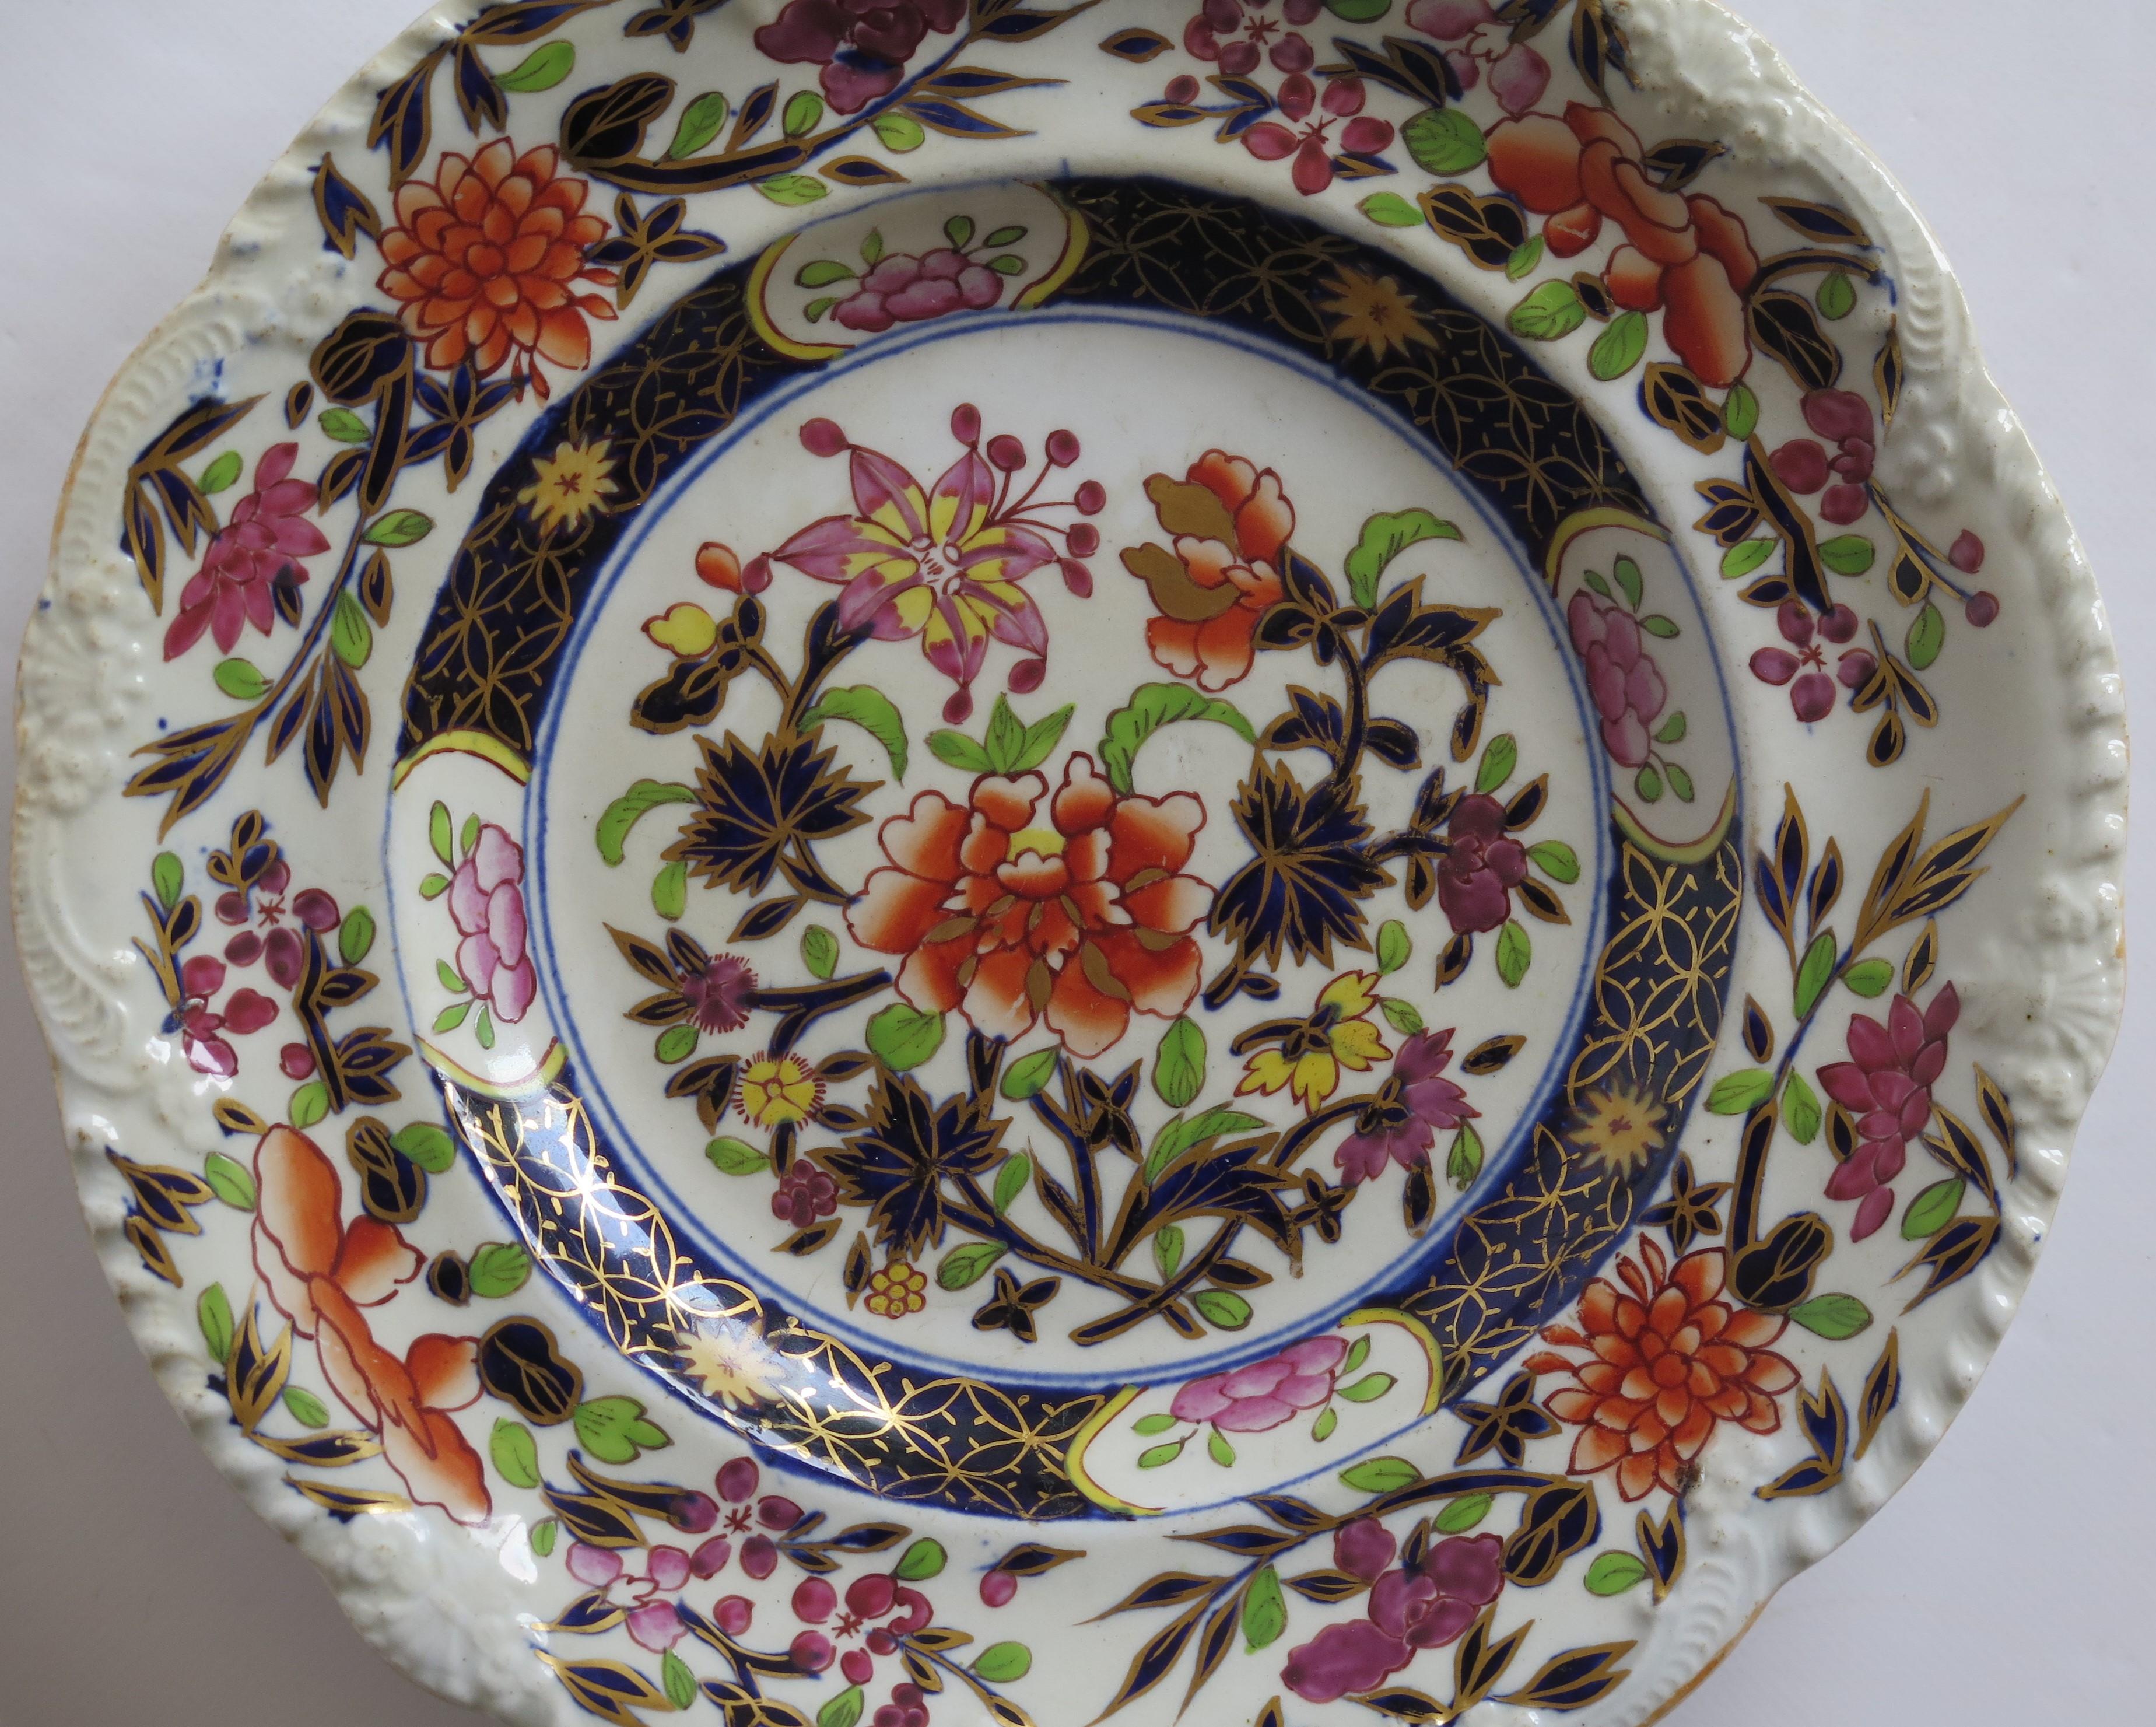 This is a very good Ironstone pottery small side plate, made by the Mason's factory at Lane Delph, Staffordshire, England and are decorated in the Heavily Floral Japan pattern, fully stamped and dating to the earliest period of Mason's Ironstone